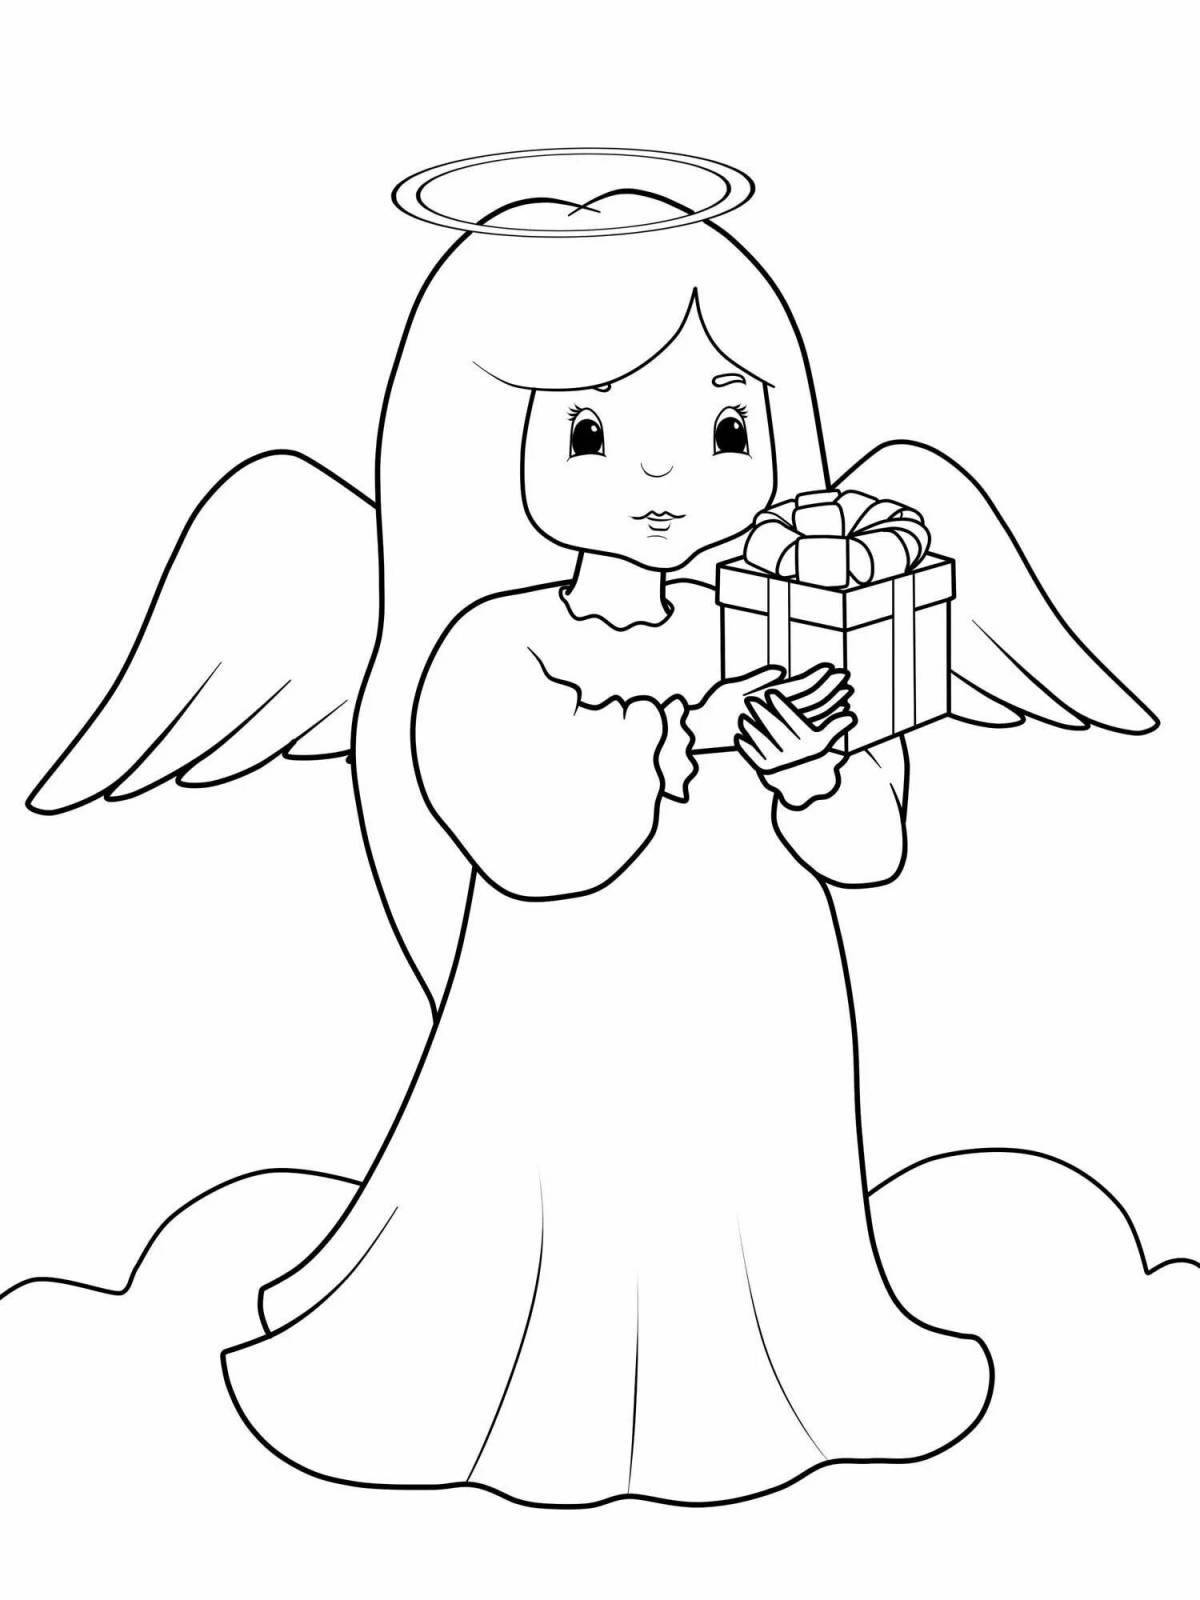 Celestial angel coloring book